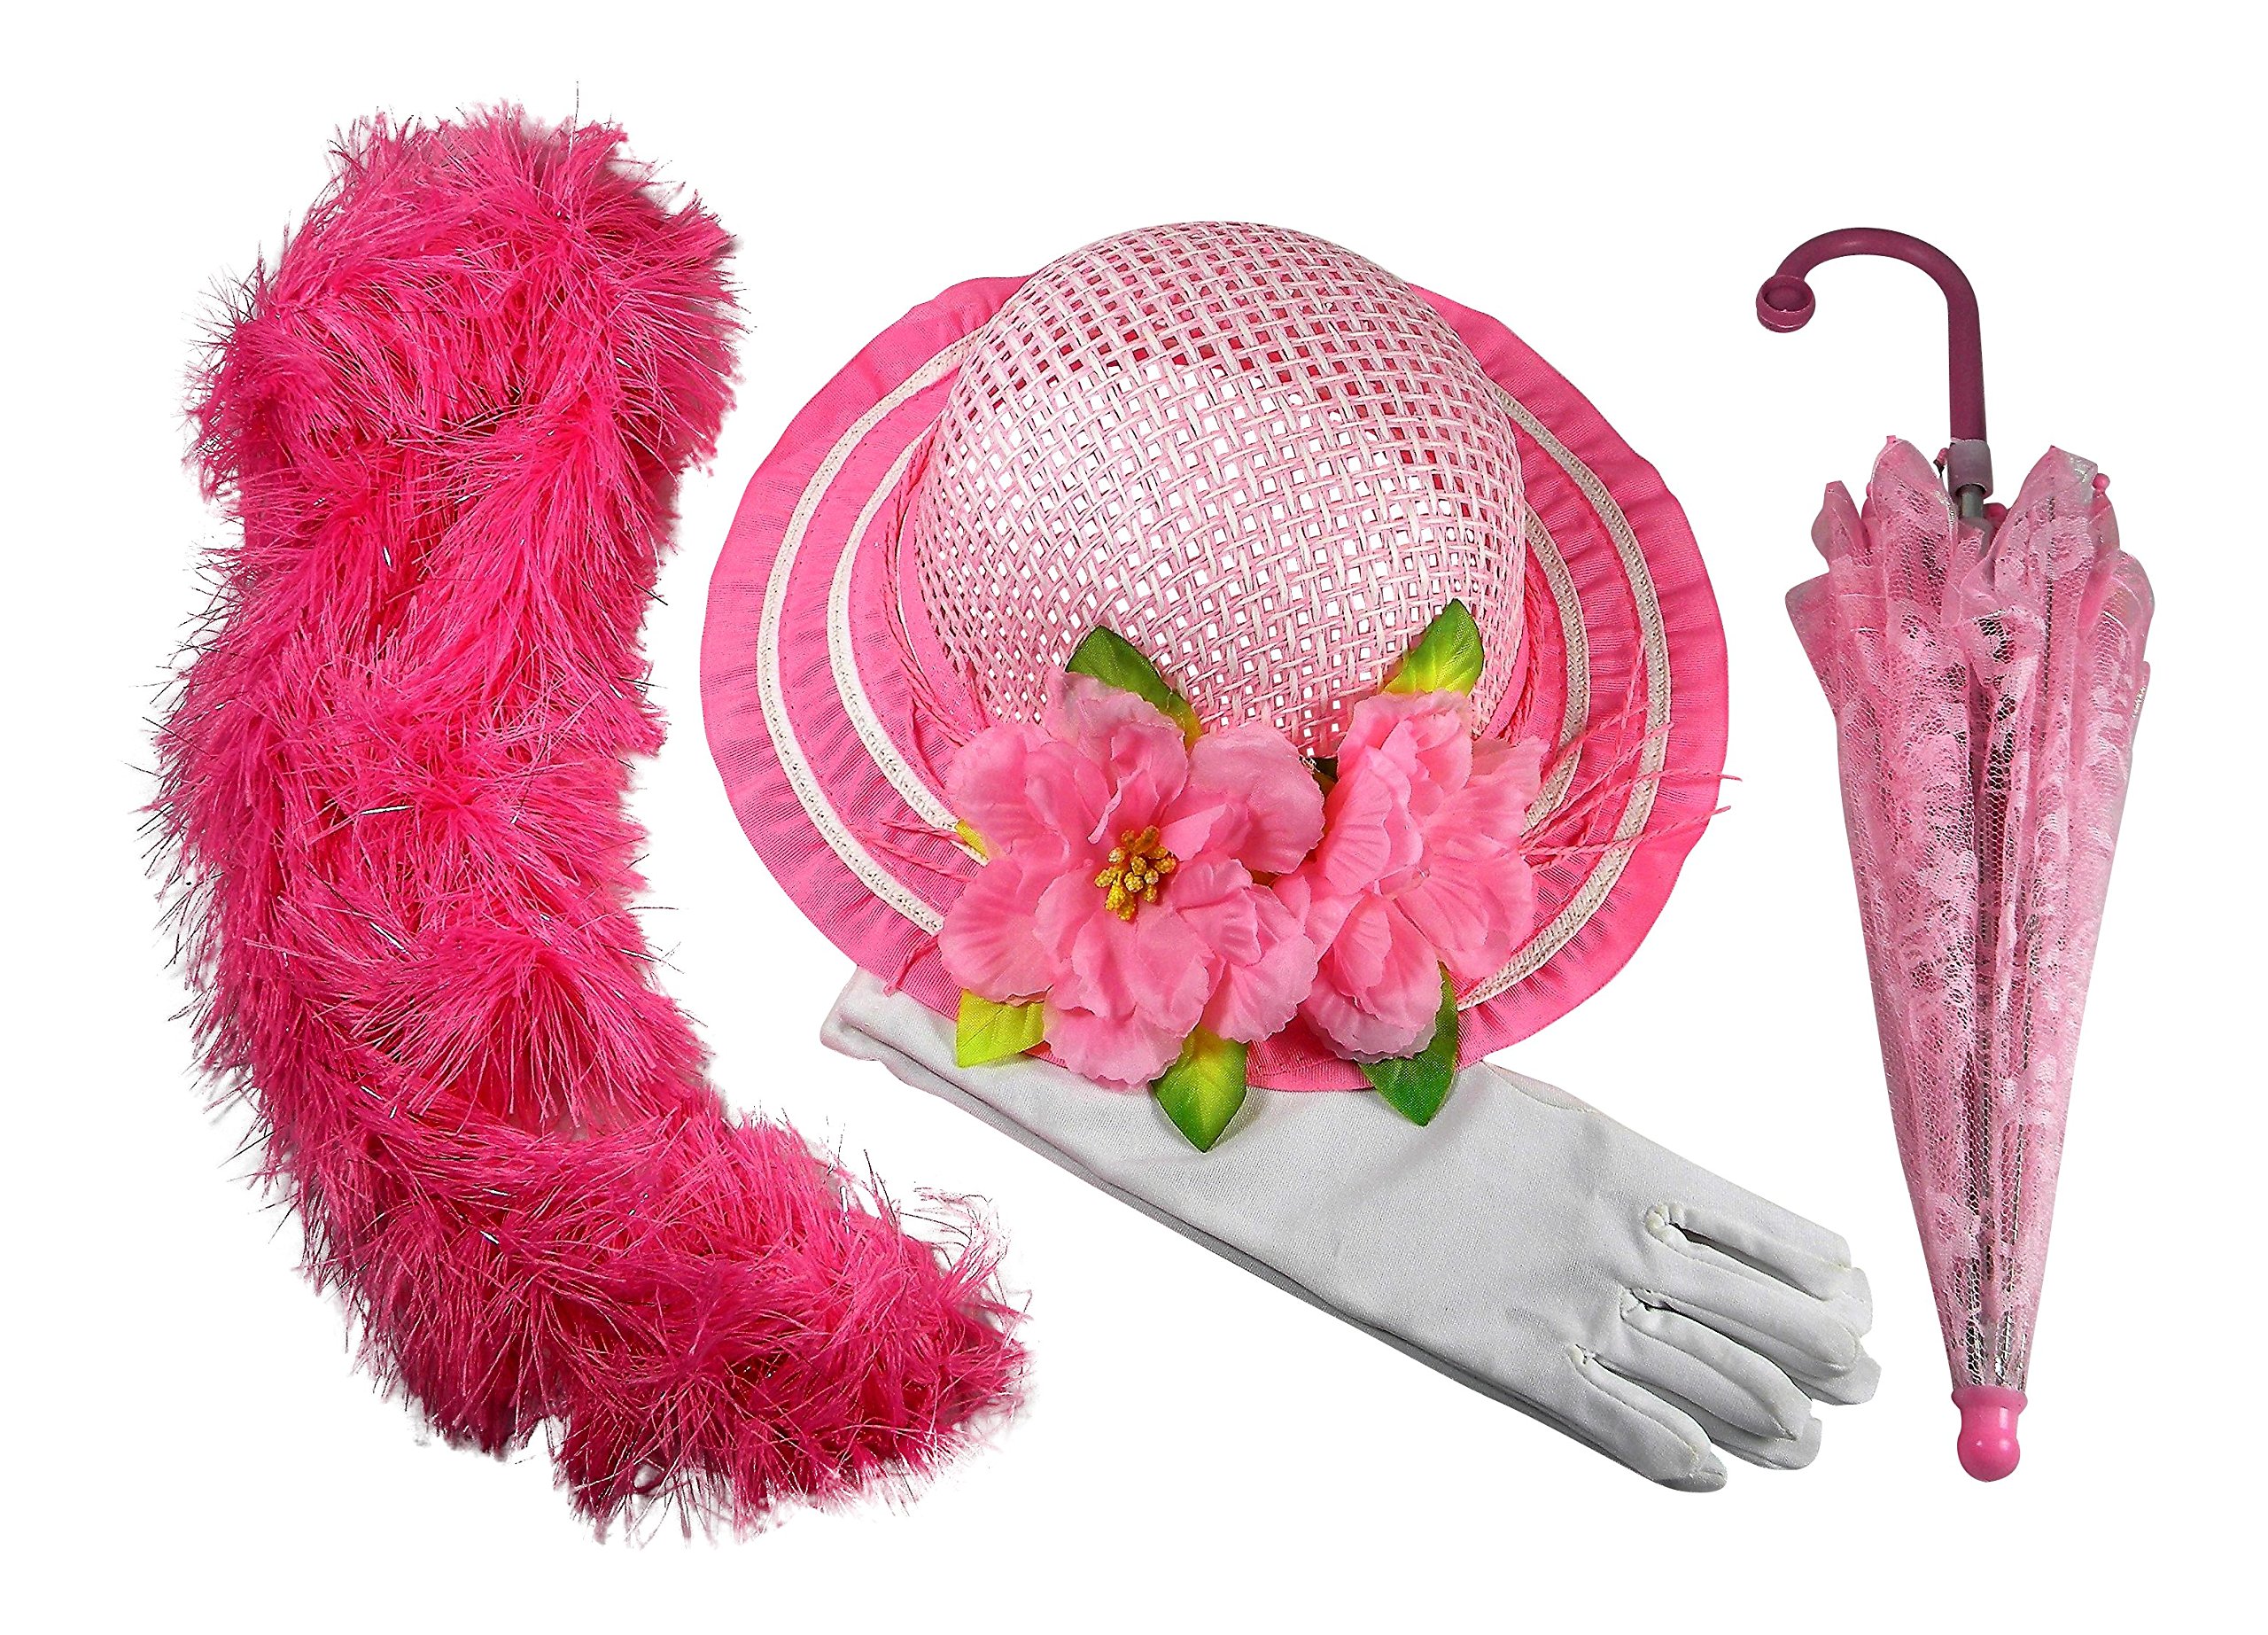 Butterfly Twinkles Girls Tea Party Hat Dress Up Hat with Pink Boa Parasol and White Gloves Light Pink